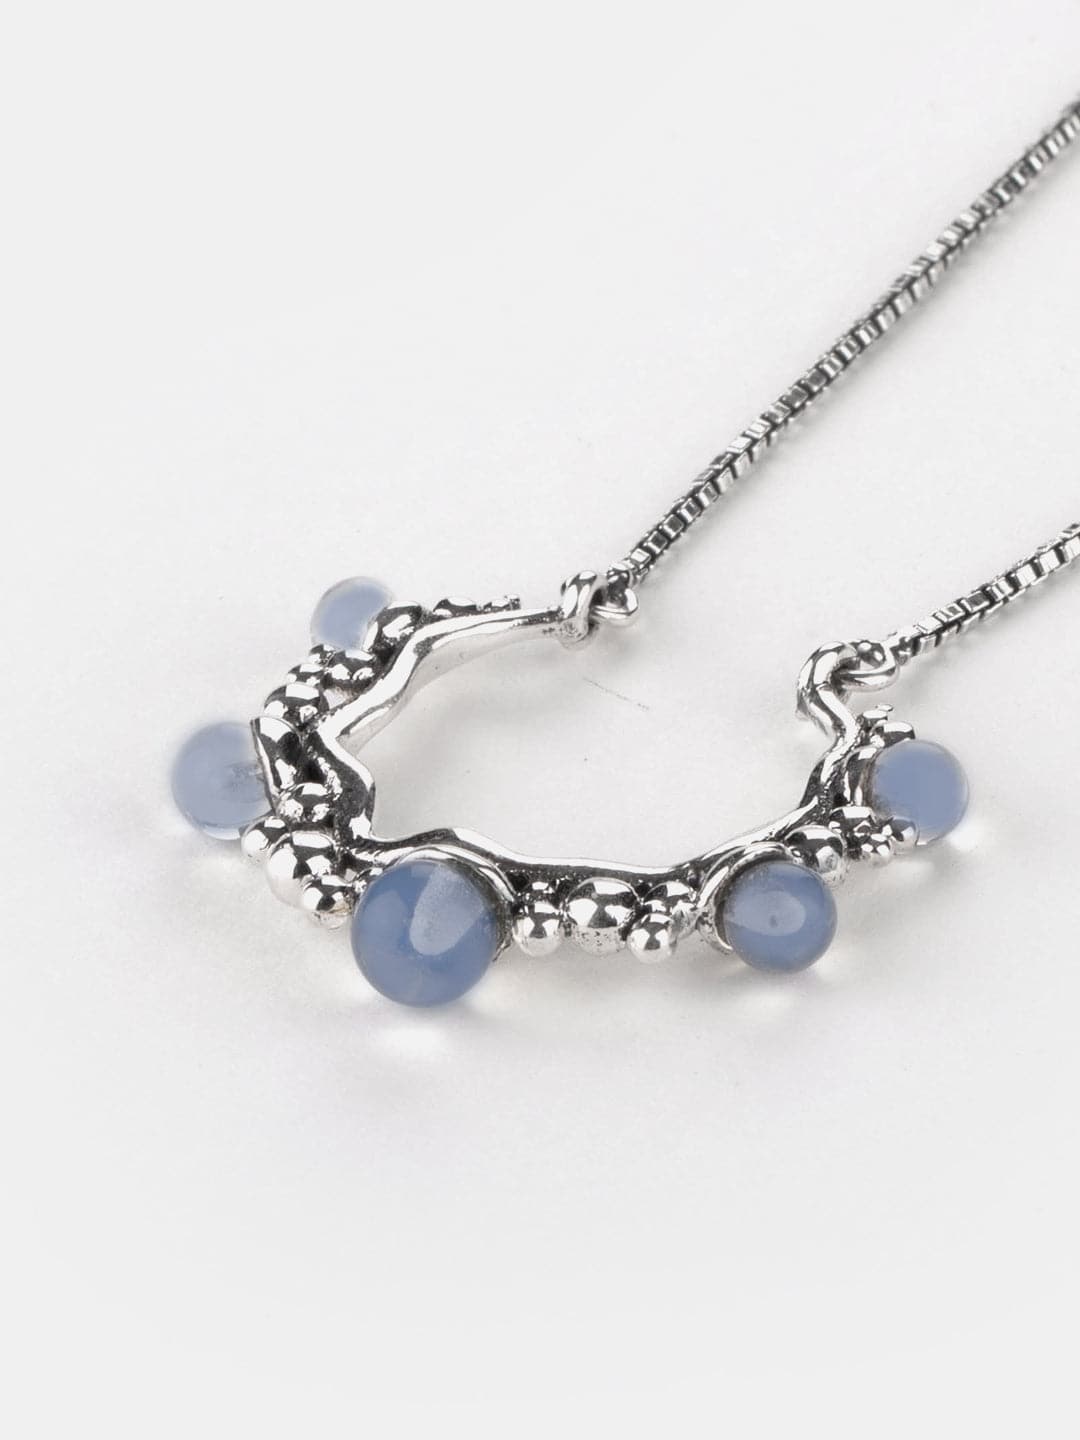 A Sunday Siesta Necklace in 925 Silver